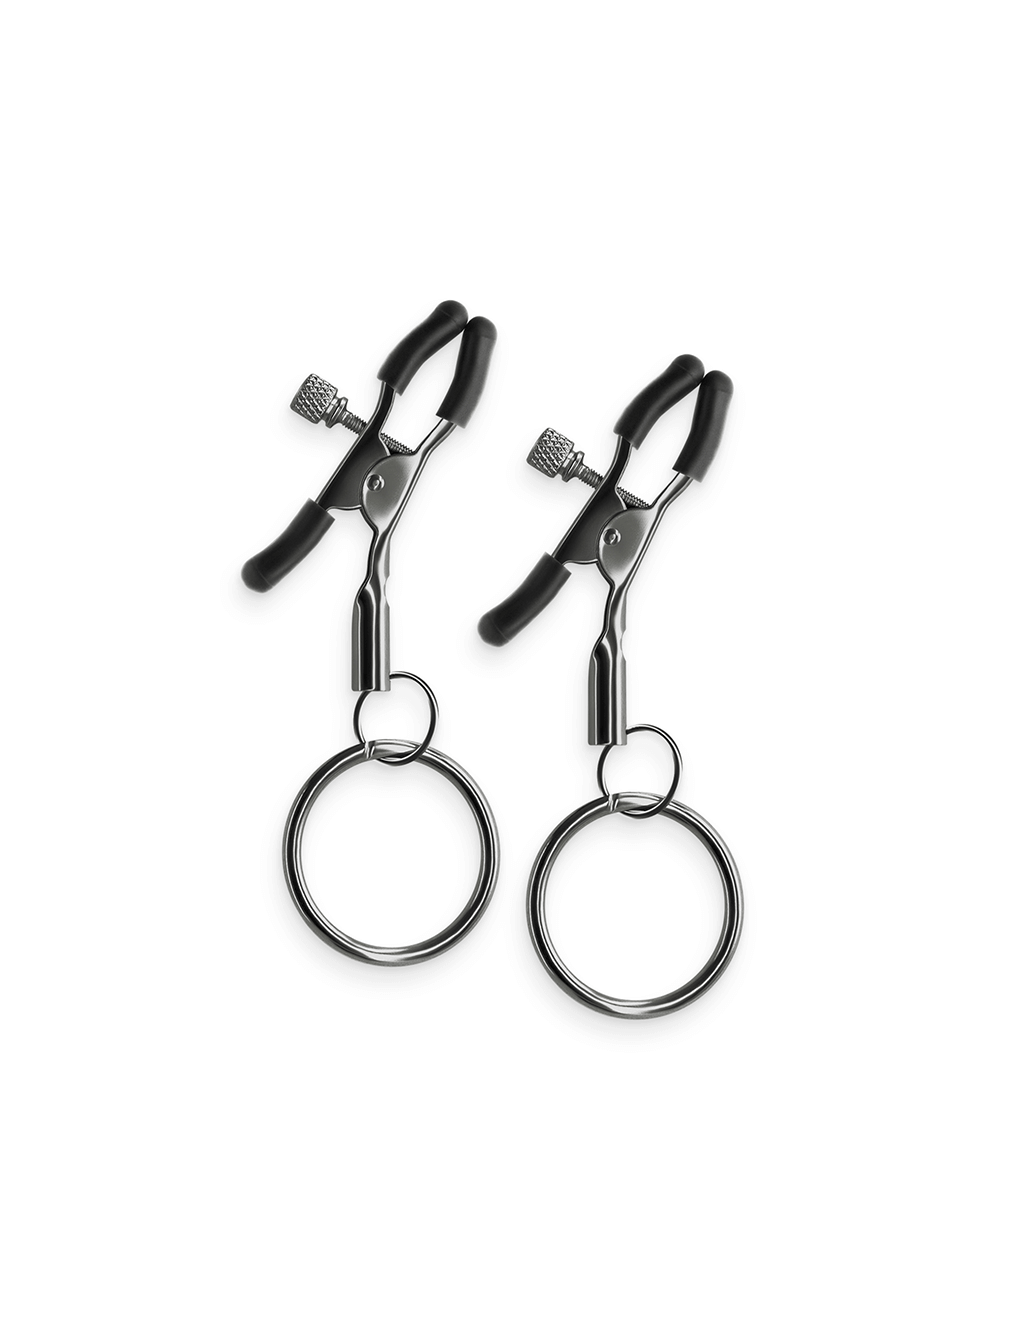 Bound Adjustable Clamps w/ Ring C2